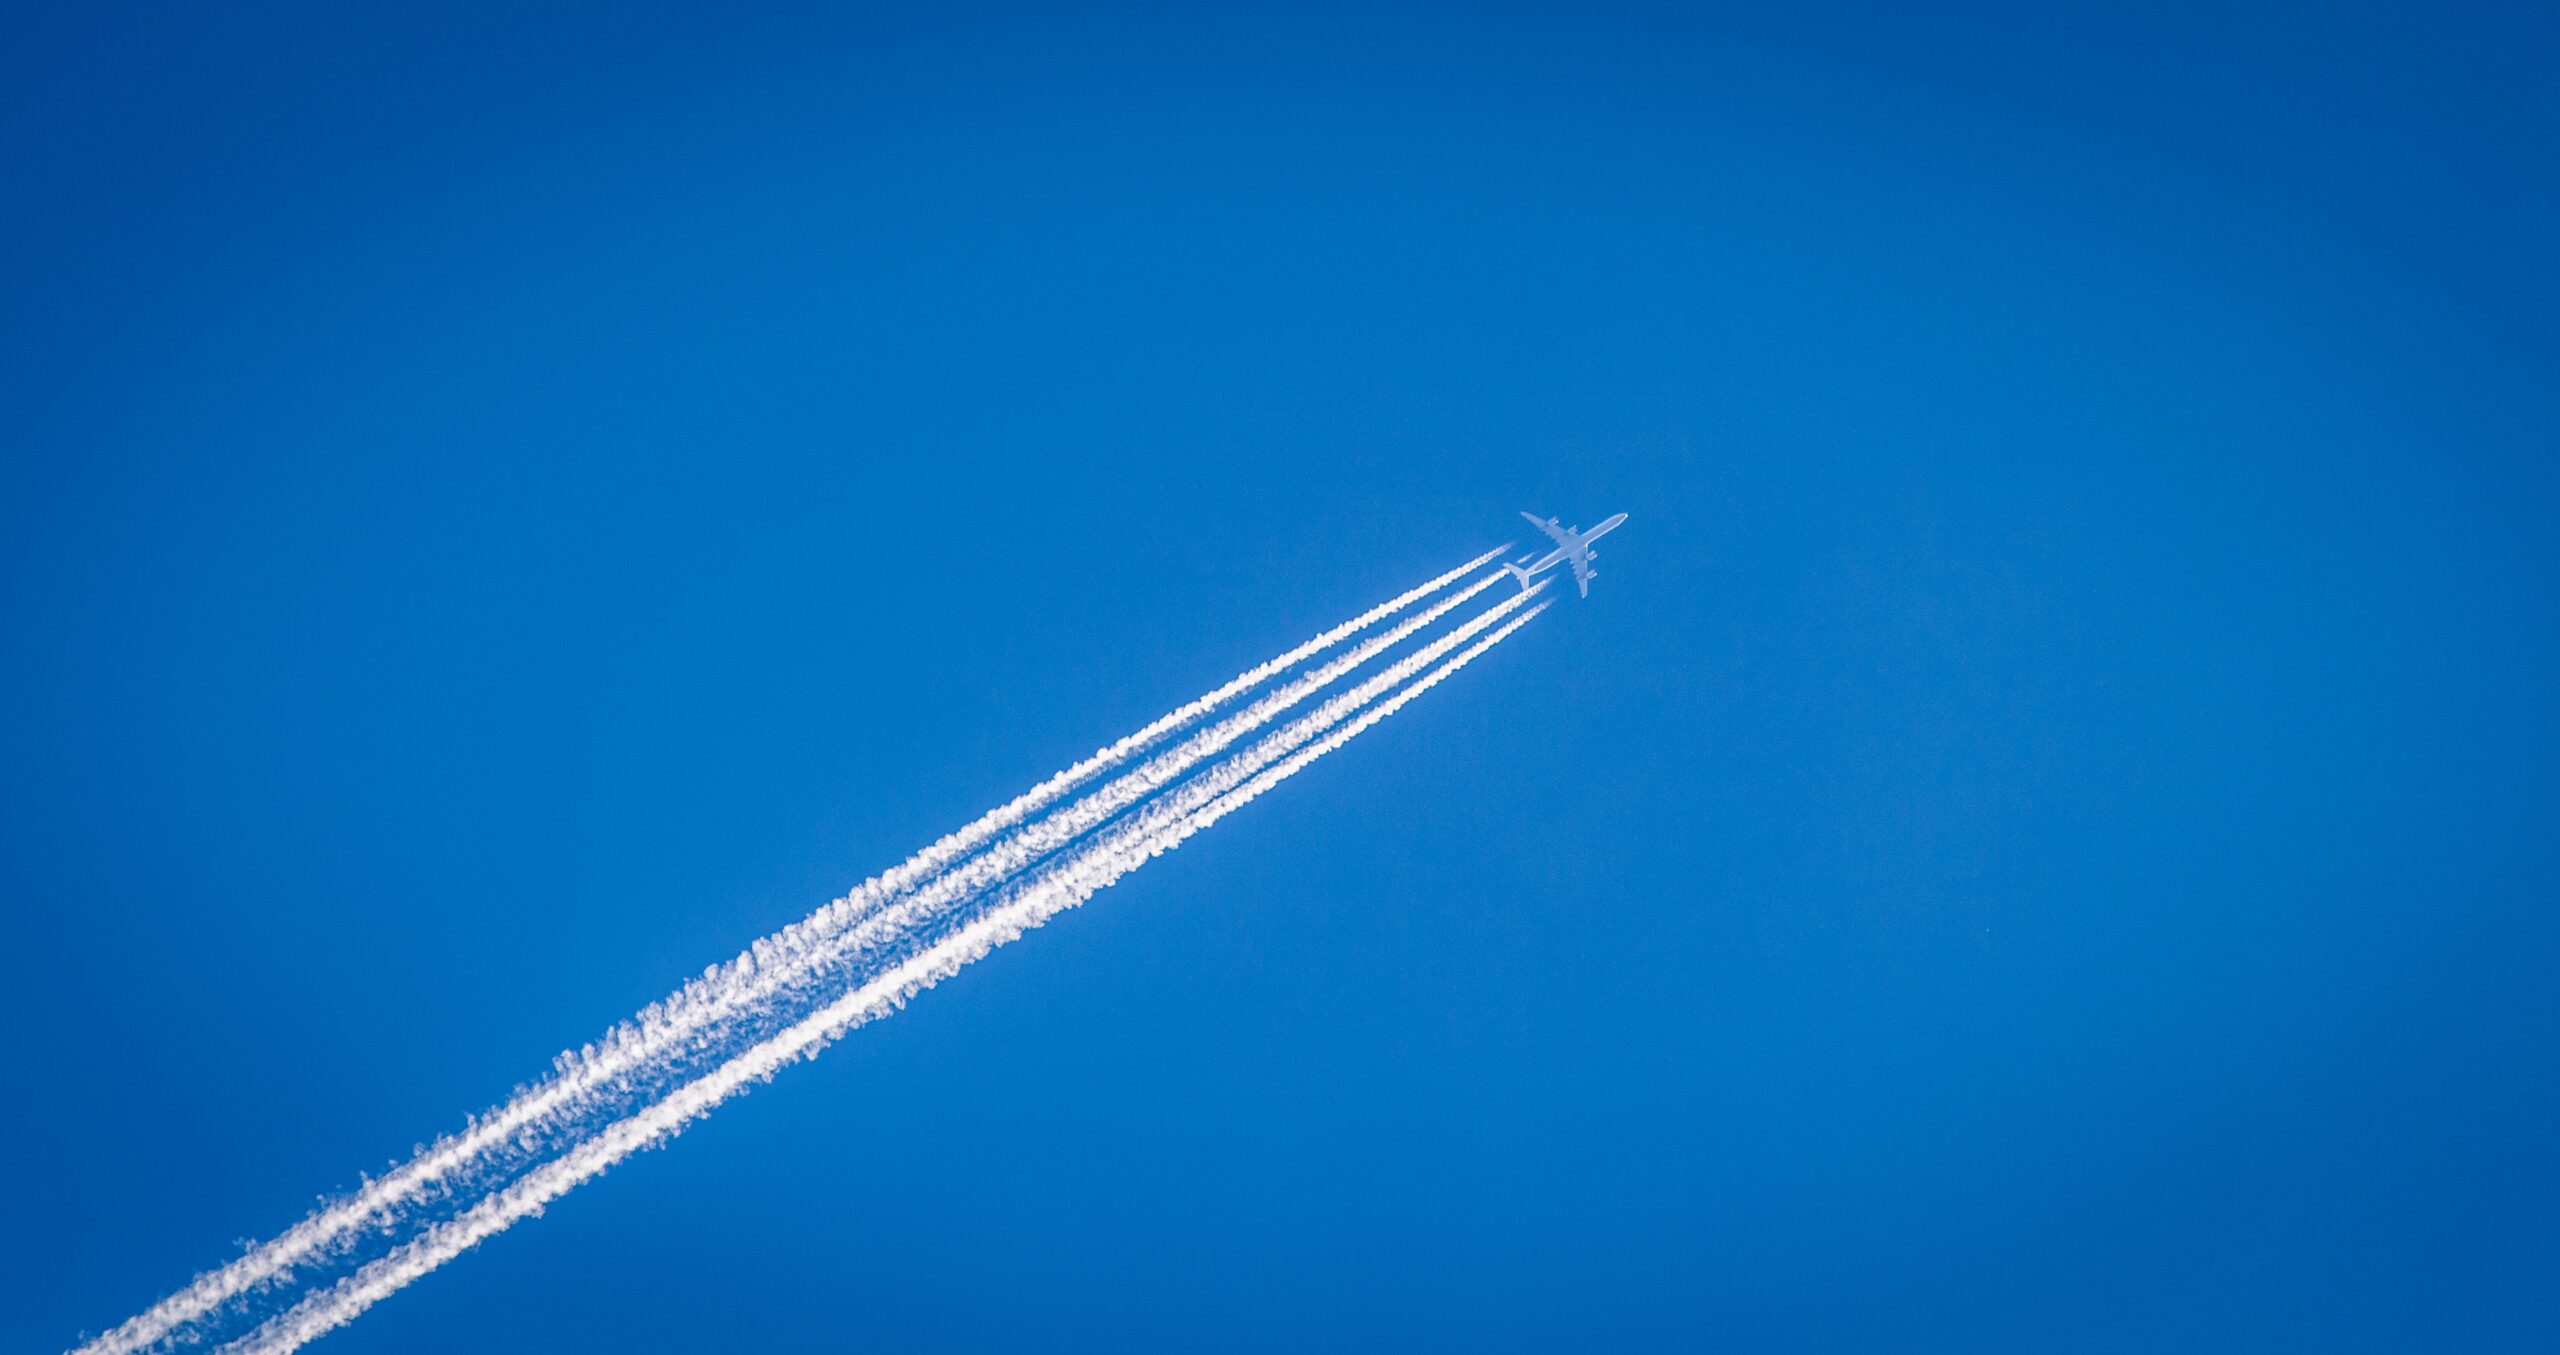 Ultrafine particles from aircraft pose hidden threat to human health ...